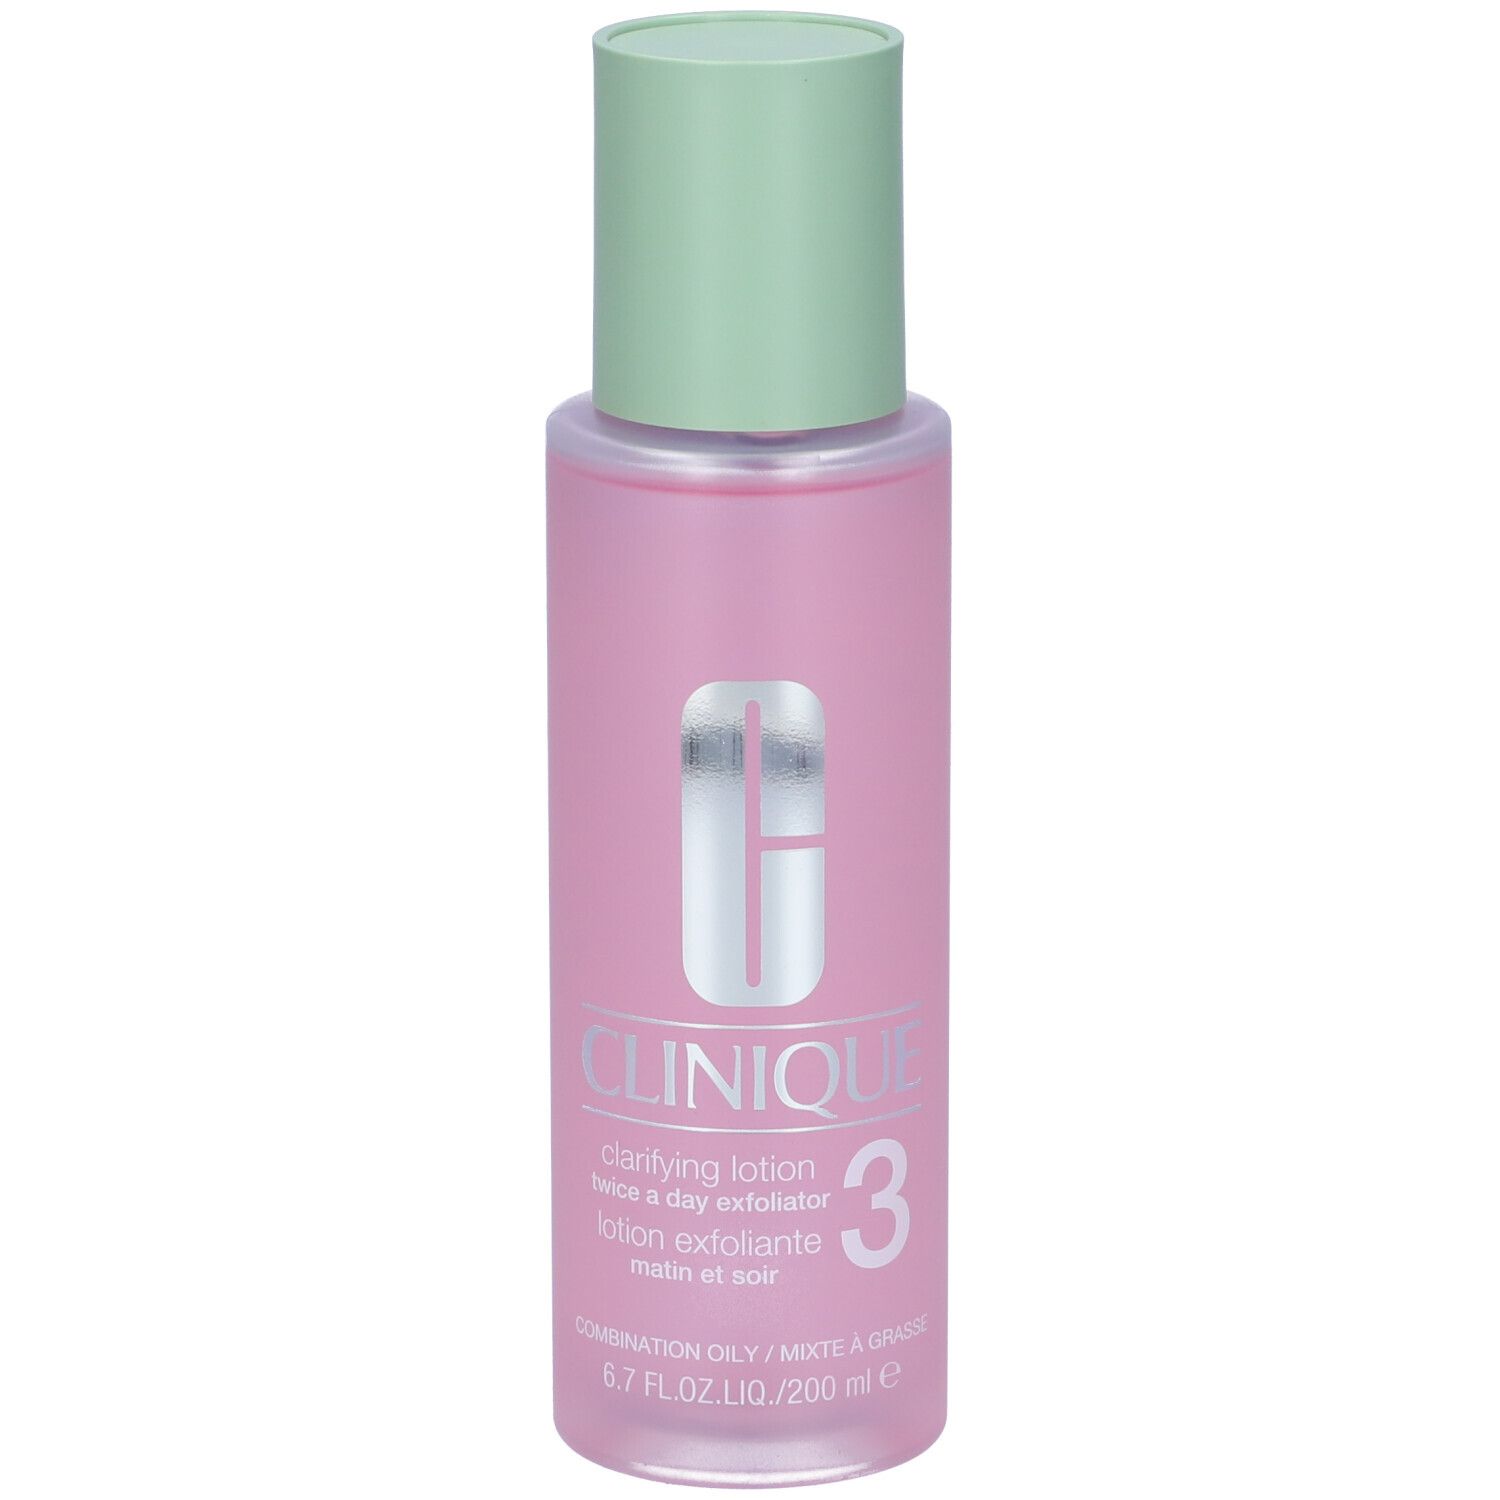 Image of Clinique Clarifying Lotion 3